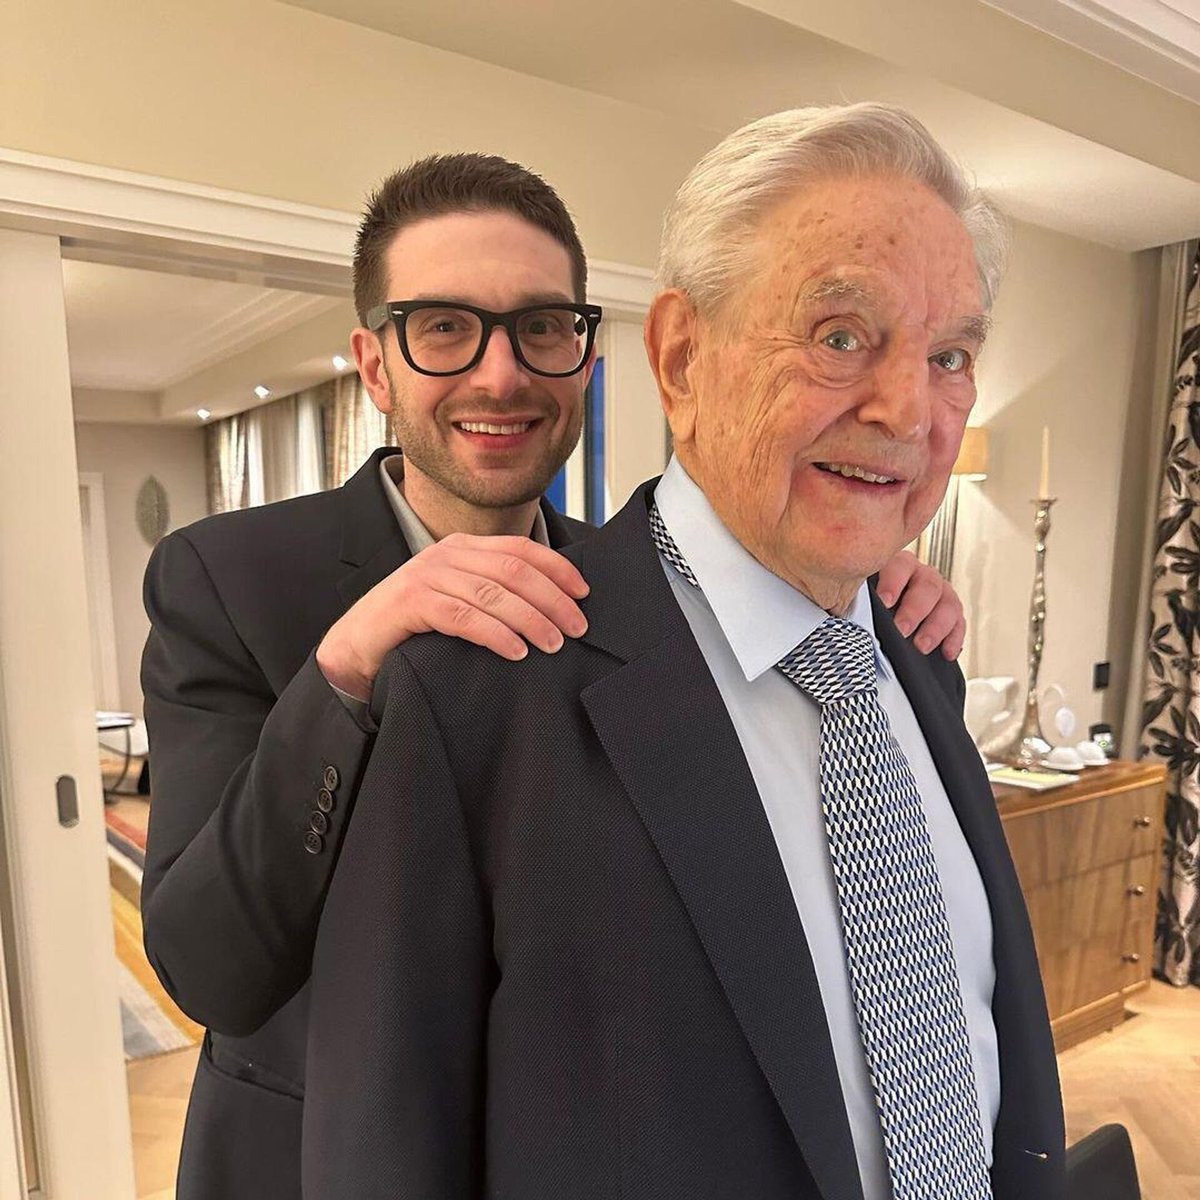 Just In:  Alex Soros is taking control over his father $25 billion empire and is already in charge of all political activities.  

Both members of the Soros family sat down with the WSJ and Alex said he’s excited to take over.  One of his primary goals will be to pump as much…